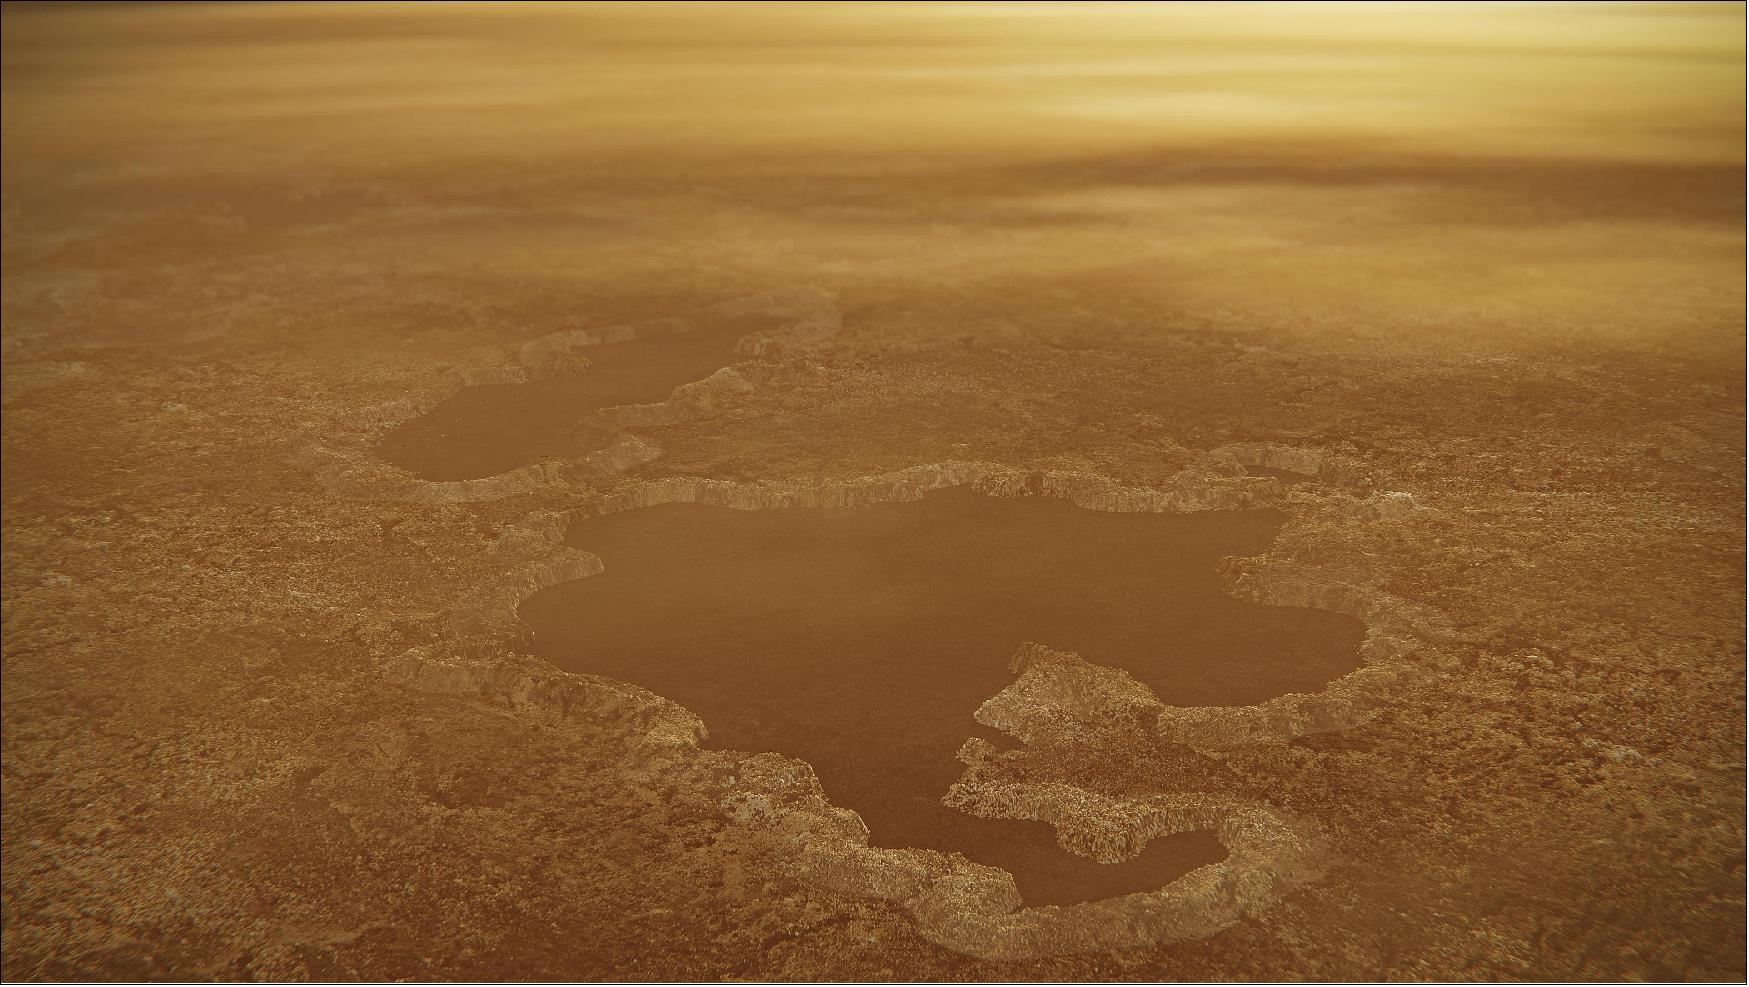 Figure 20: This artist's concept of a lake at the north pole of Saturn's moon Titan illustrates raised rims and rampartlike features such as those seen by NASA's Cassini spacecraft around the moon's Winnipeg Lacus. New research using Cassini radar data and modeling proposes that lake basins like these are likely explosion craters, which could have formed when liquid molecular nitrogen deposits within the crust warmed and quickly turned to vapor, blowing holes in the moon's crust. This would have happened during a warming event (or events) that occurred in a colder, nitrogen-dominated period in Titan's past. The new research may provide evidence of these cold periods in Titan's past, followed by a relative warming to conditions like those of today. Although Titan is frigid compared to Earth, methane in the atmosphere provides a greenhouse effect that warms the moon's surface (image credit: NASA/JPL-Caltech)